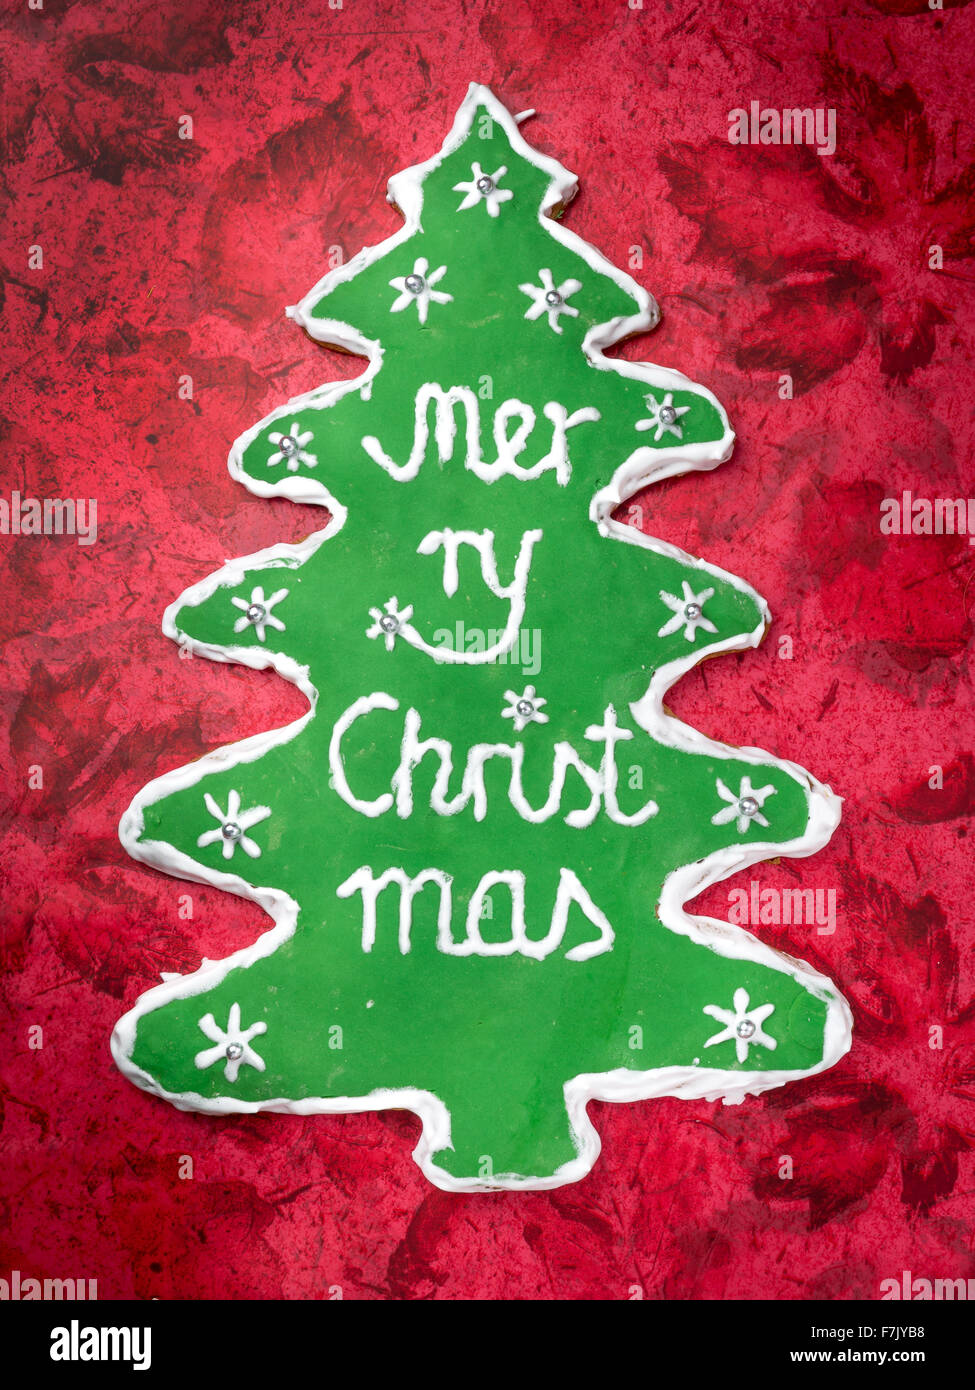 Christmas tree-like gingerbread cookie with green icing and Merry Christmas writing on red background Stock Photo